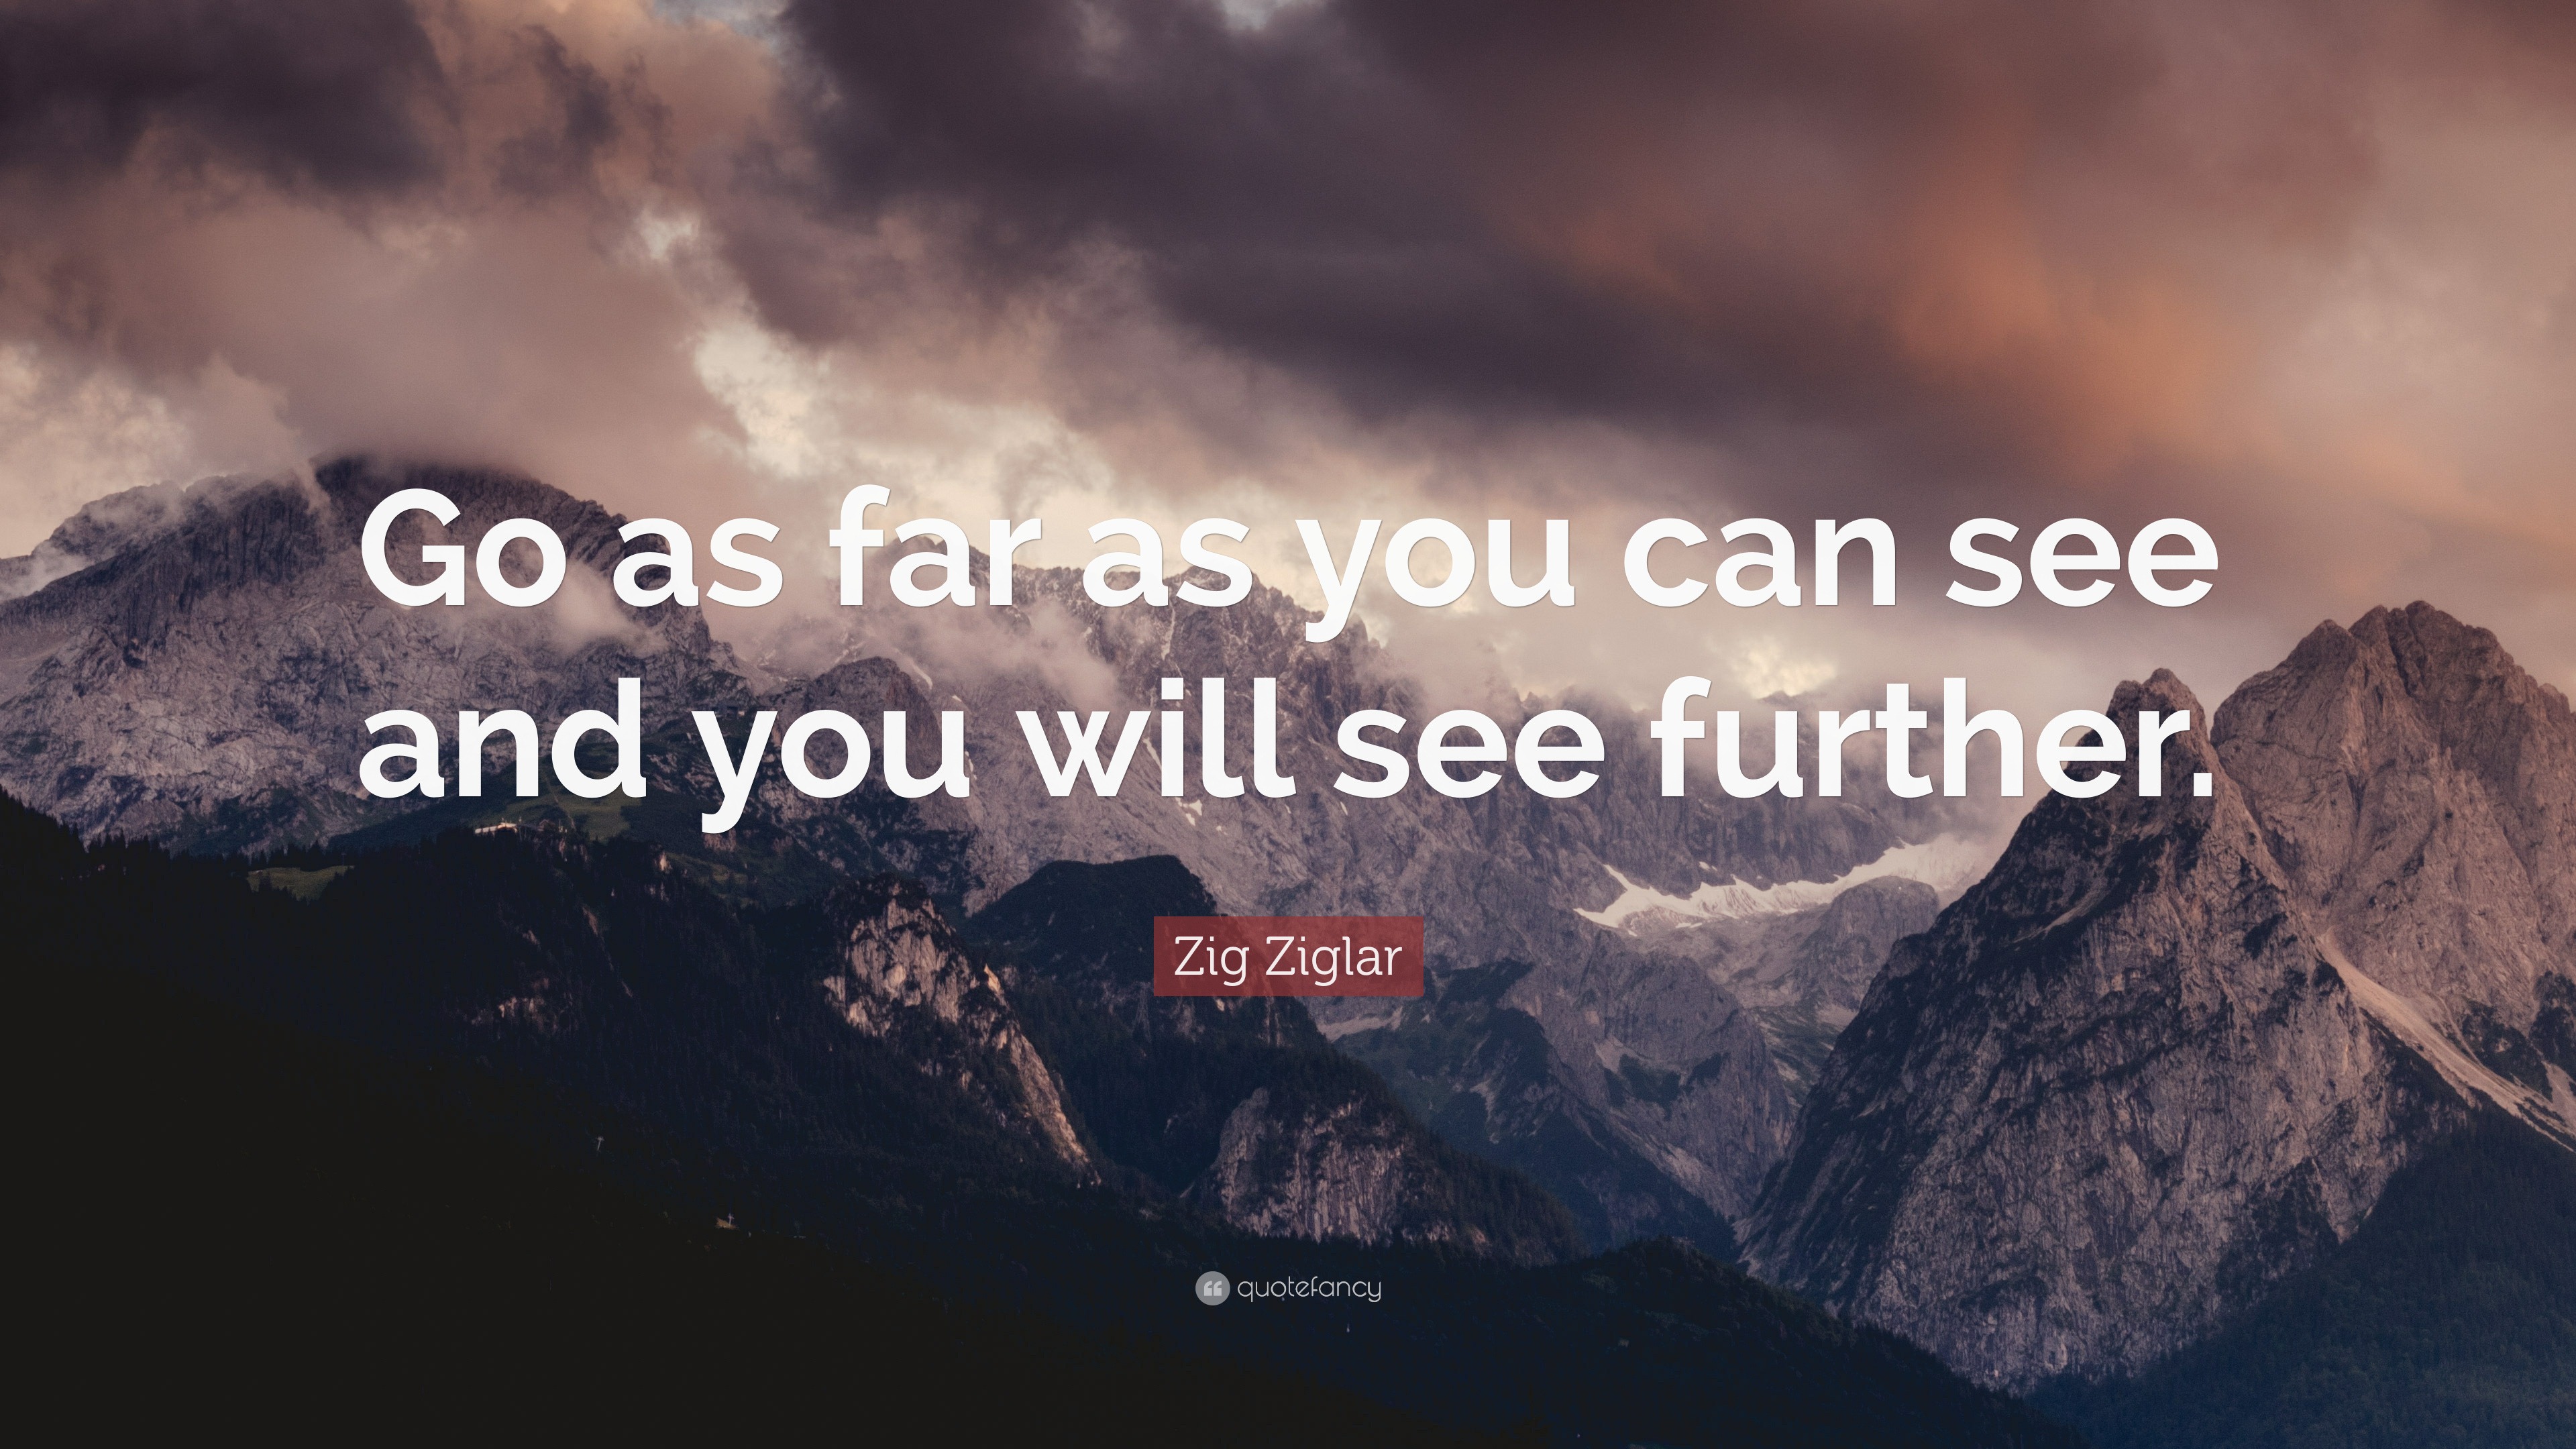 Zig Ziglar Quote Go As Far As You Can See And You Will See Further